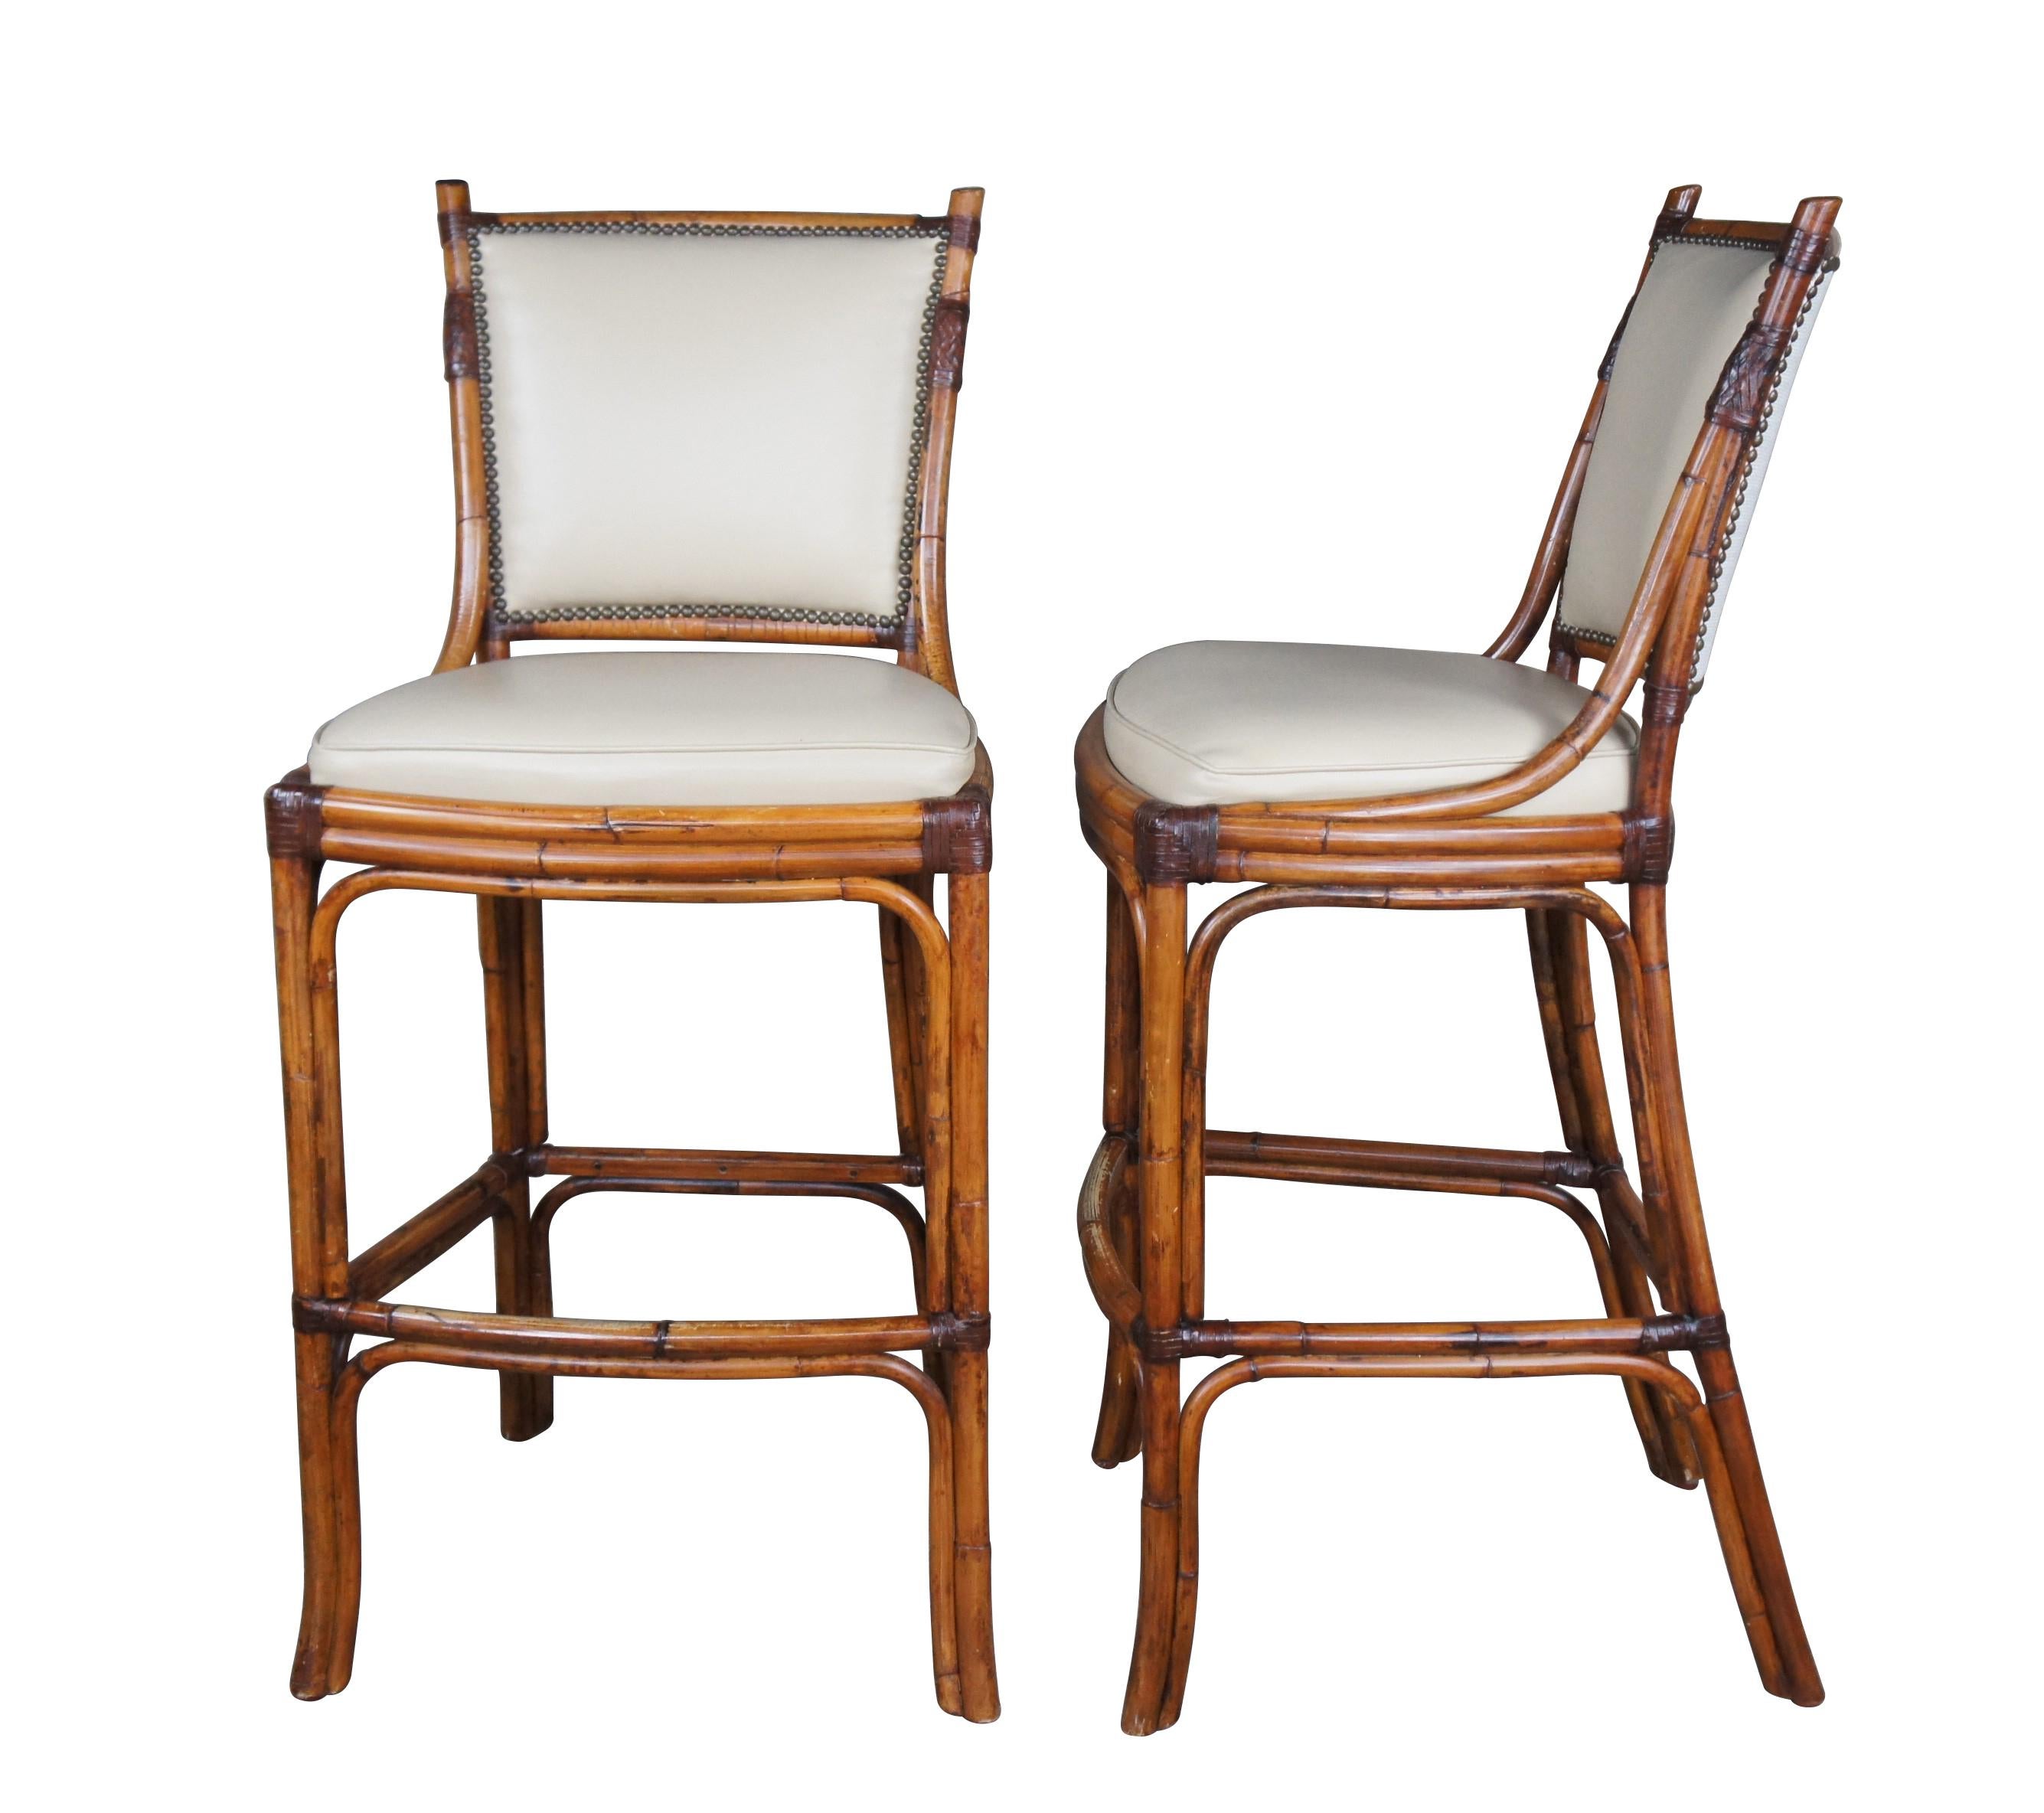 Vintage set of three Pierce Martin barstools featuring faux bamboo and rattan frame with foot rest, leather seat, nailhead trim and linen back.

Atlanta-based, PierceMartin is continuously setting new standards as a 